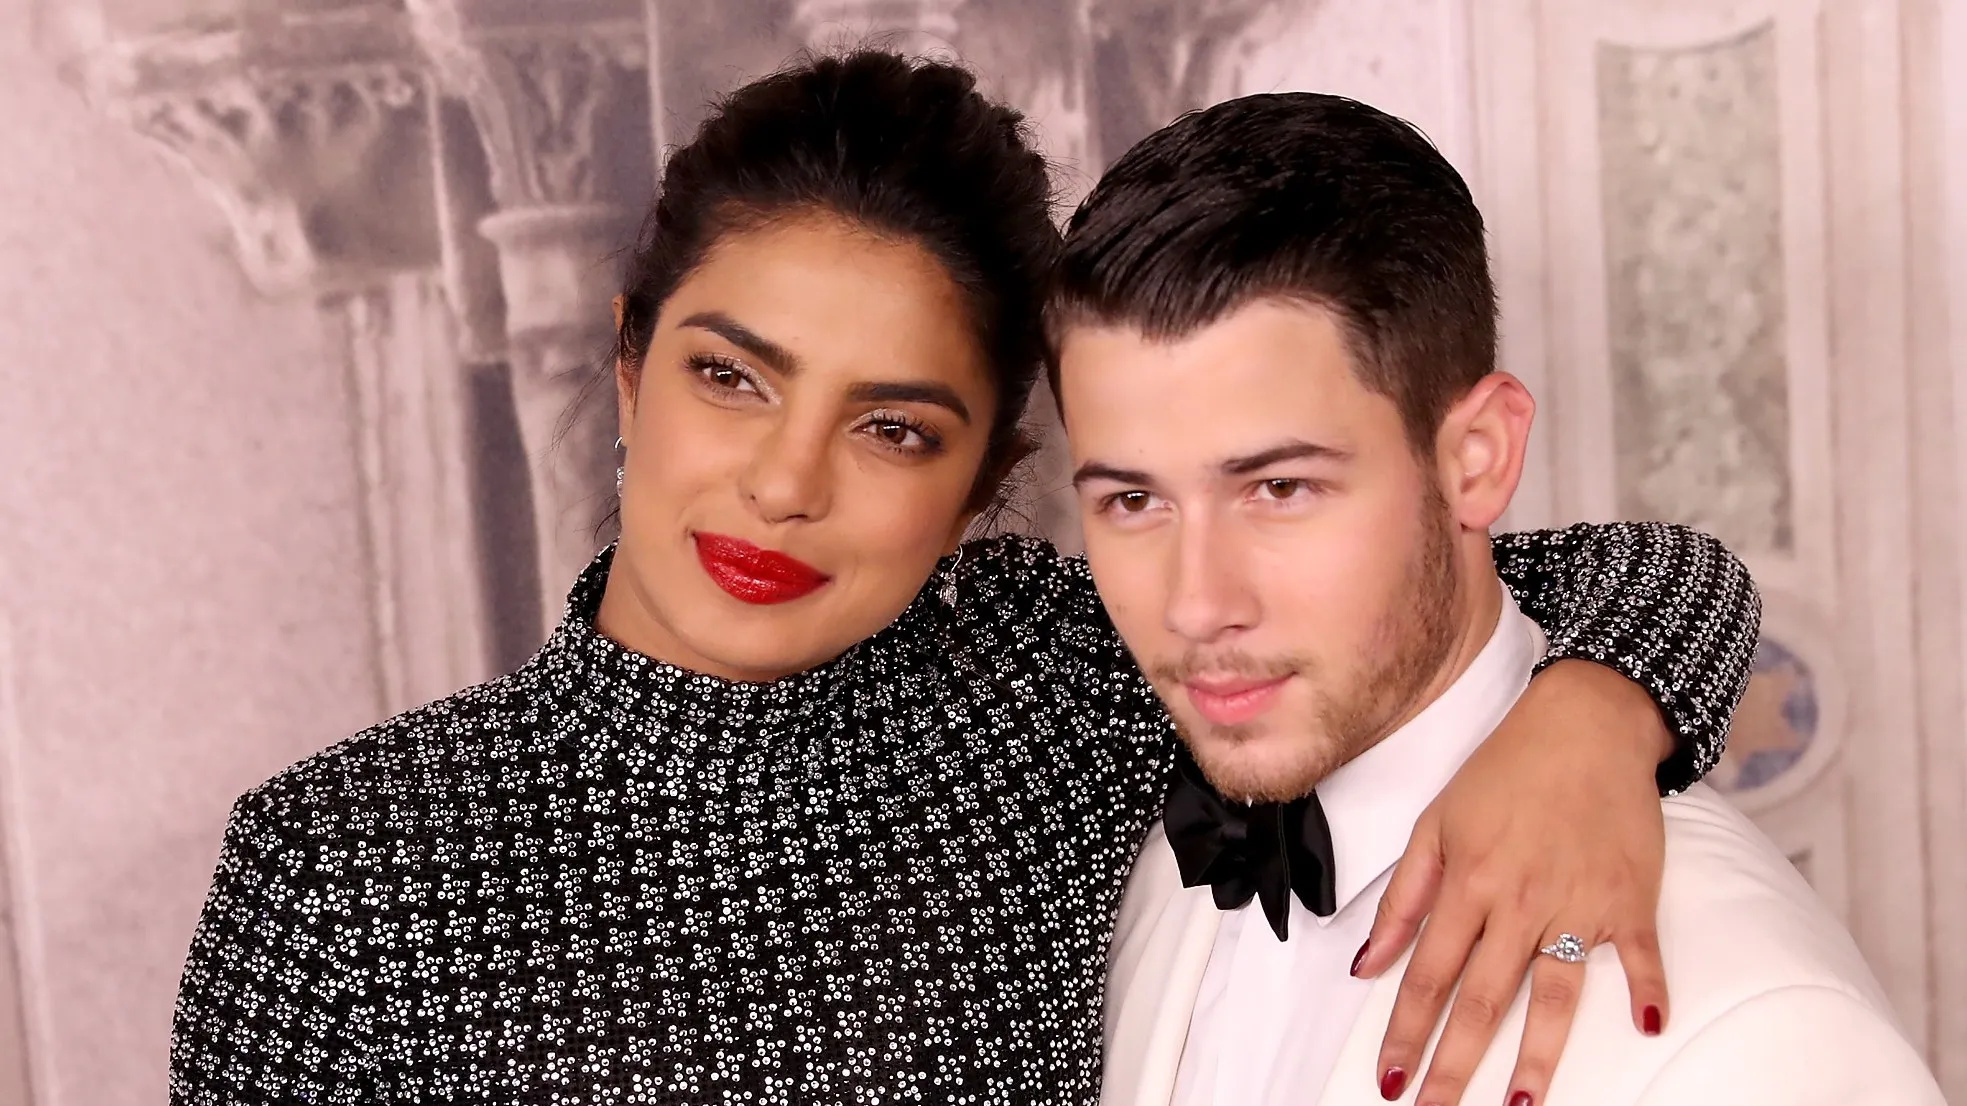 Priyanka Chopra and Nick Jonas: Attended the premiere of Isn't It Romantic together in Los Angeles in February 2019. 1970x1110 HD Wallpaper.